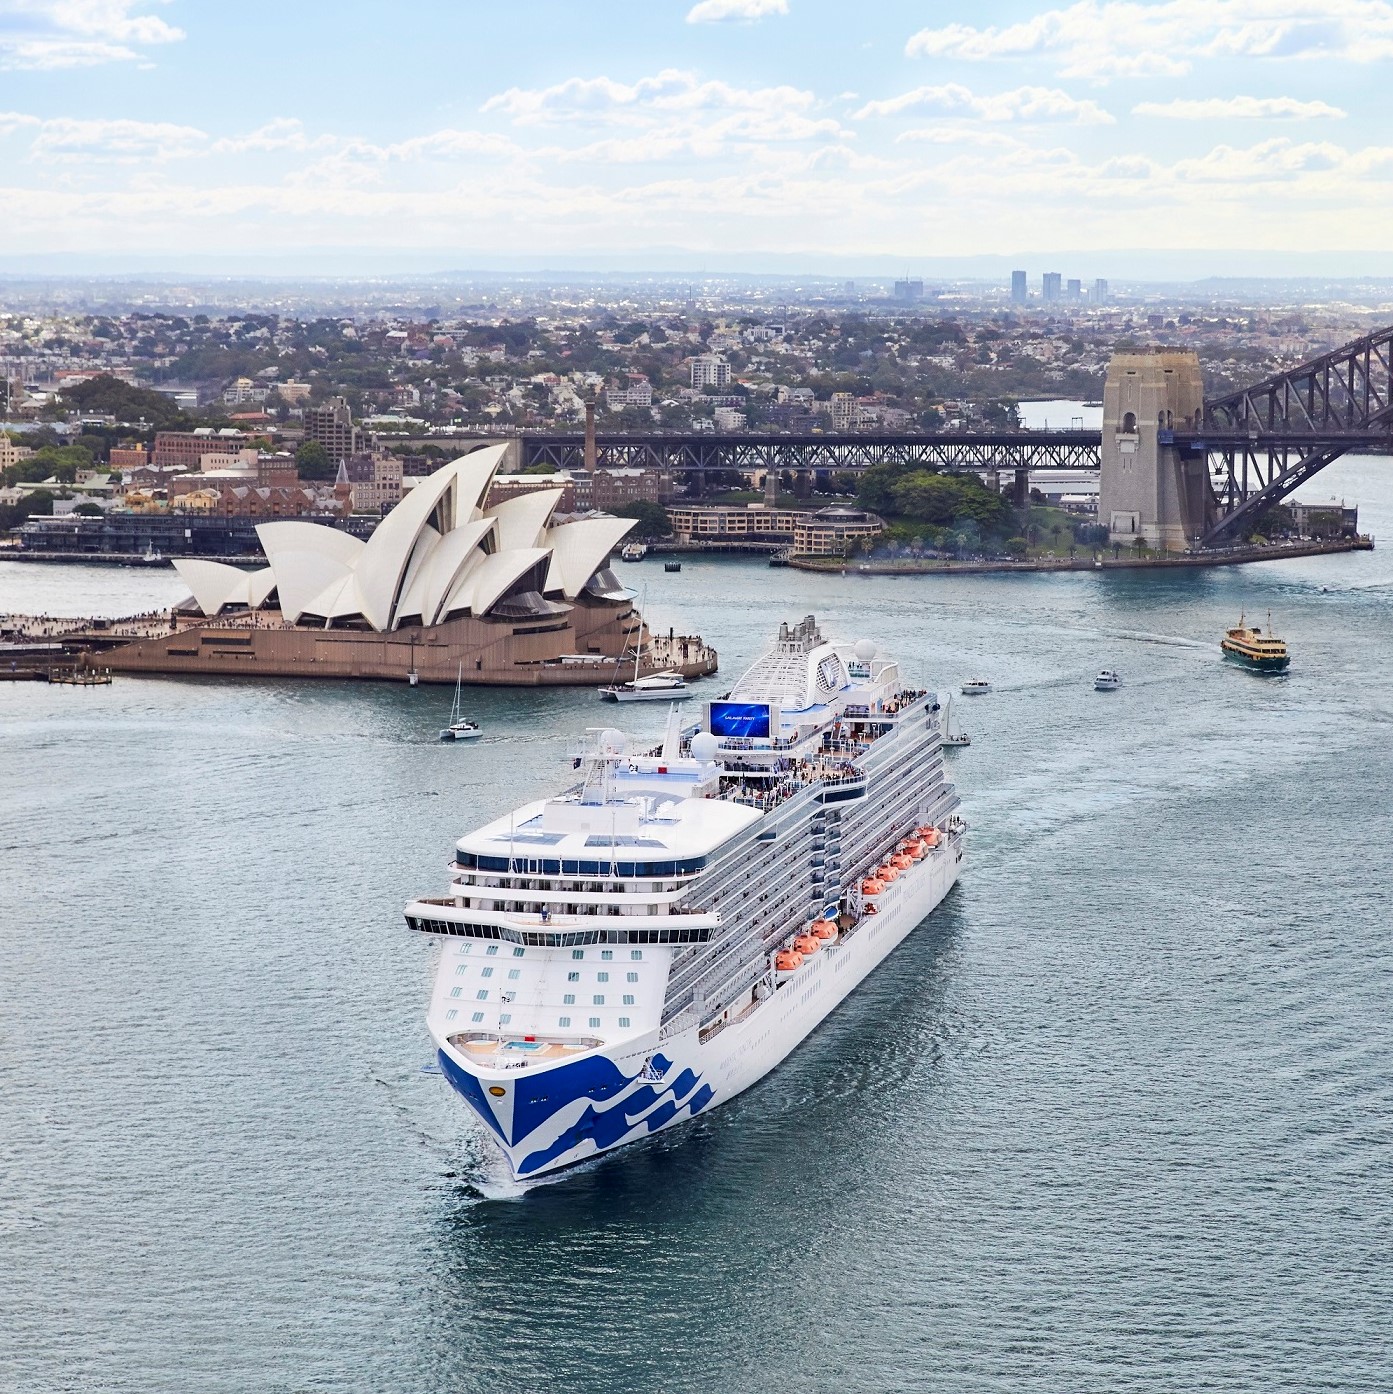 Princess Cruises explores Australia & New Zealand with 5 ships in 2021